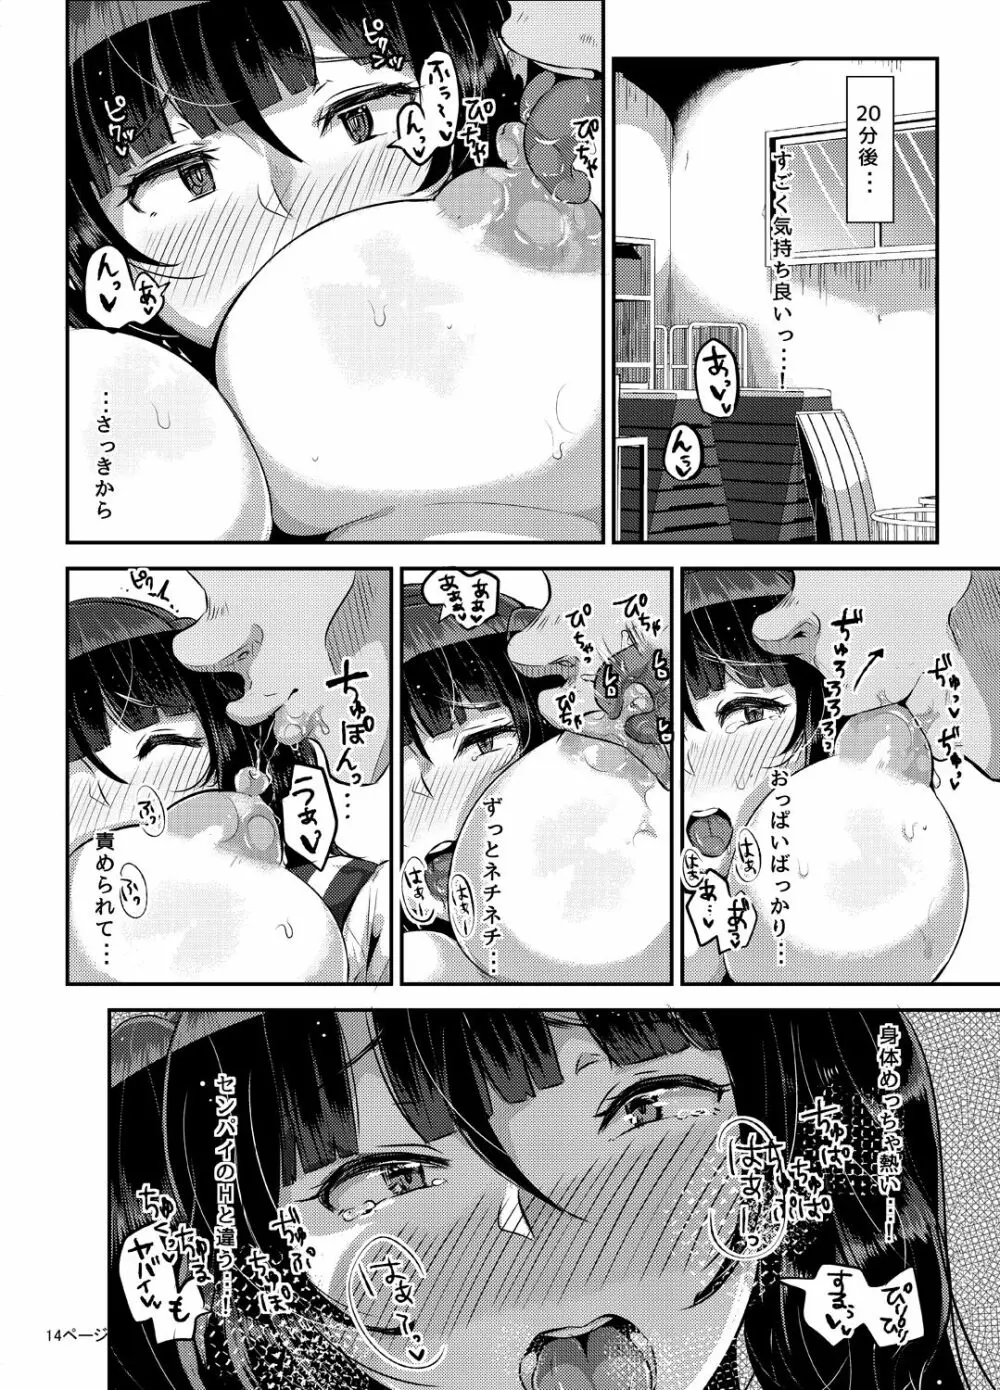 好き好き好き好き好き好き好き好き ver.3 Page.15